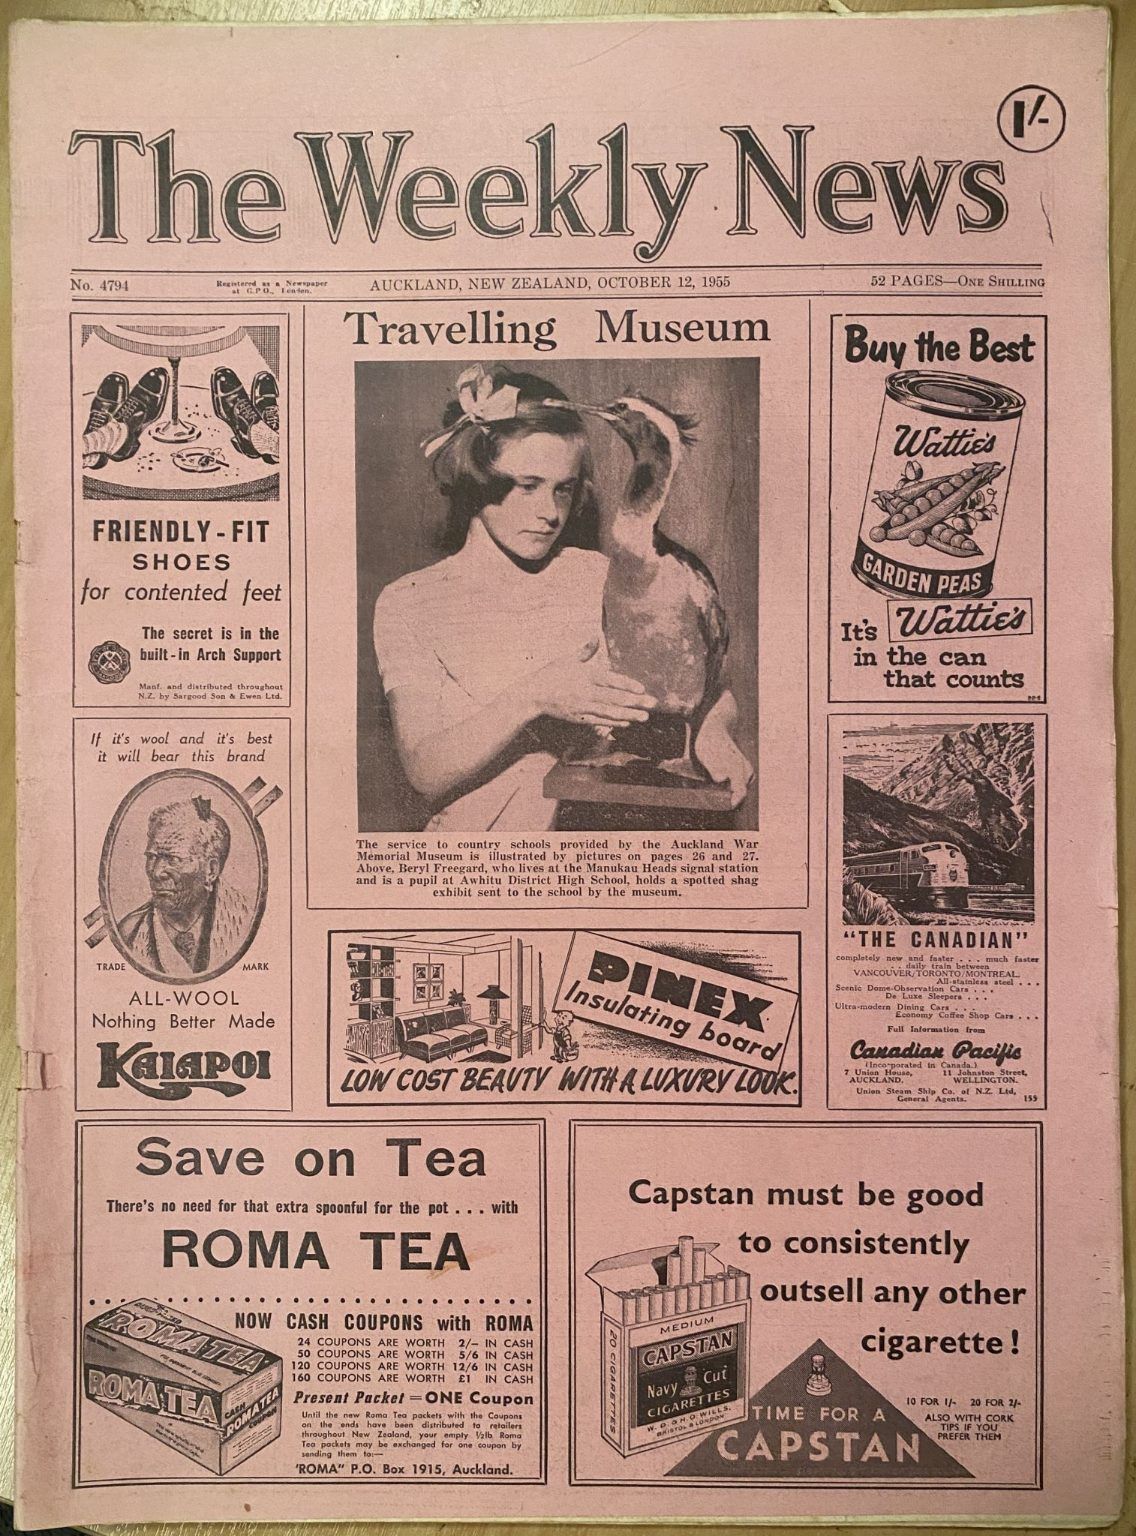 OLD NEWSPAPER: The Weekly News - No. 4794, 12 October 1955